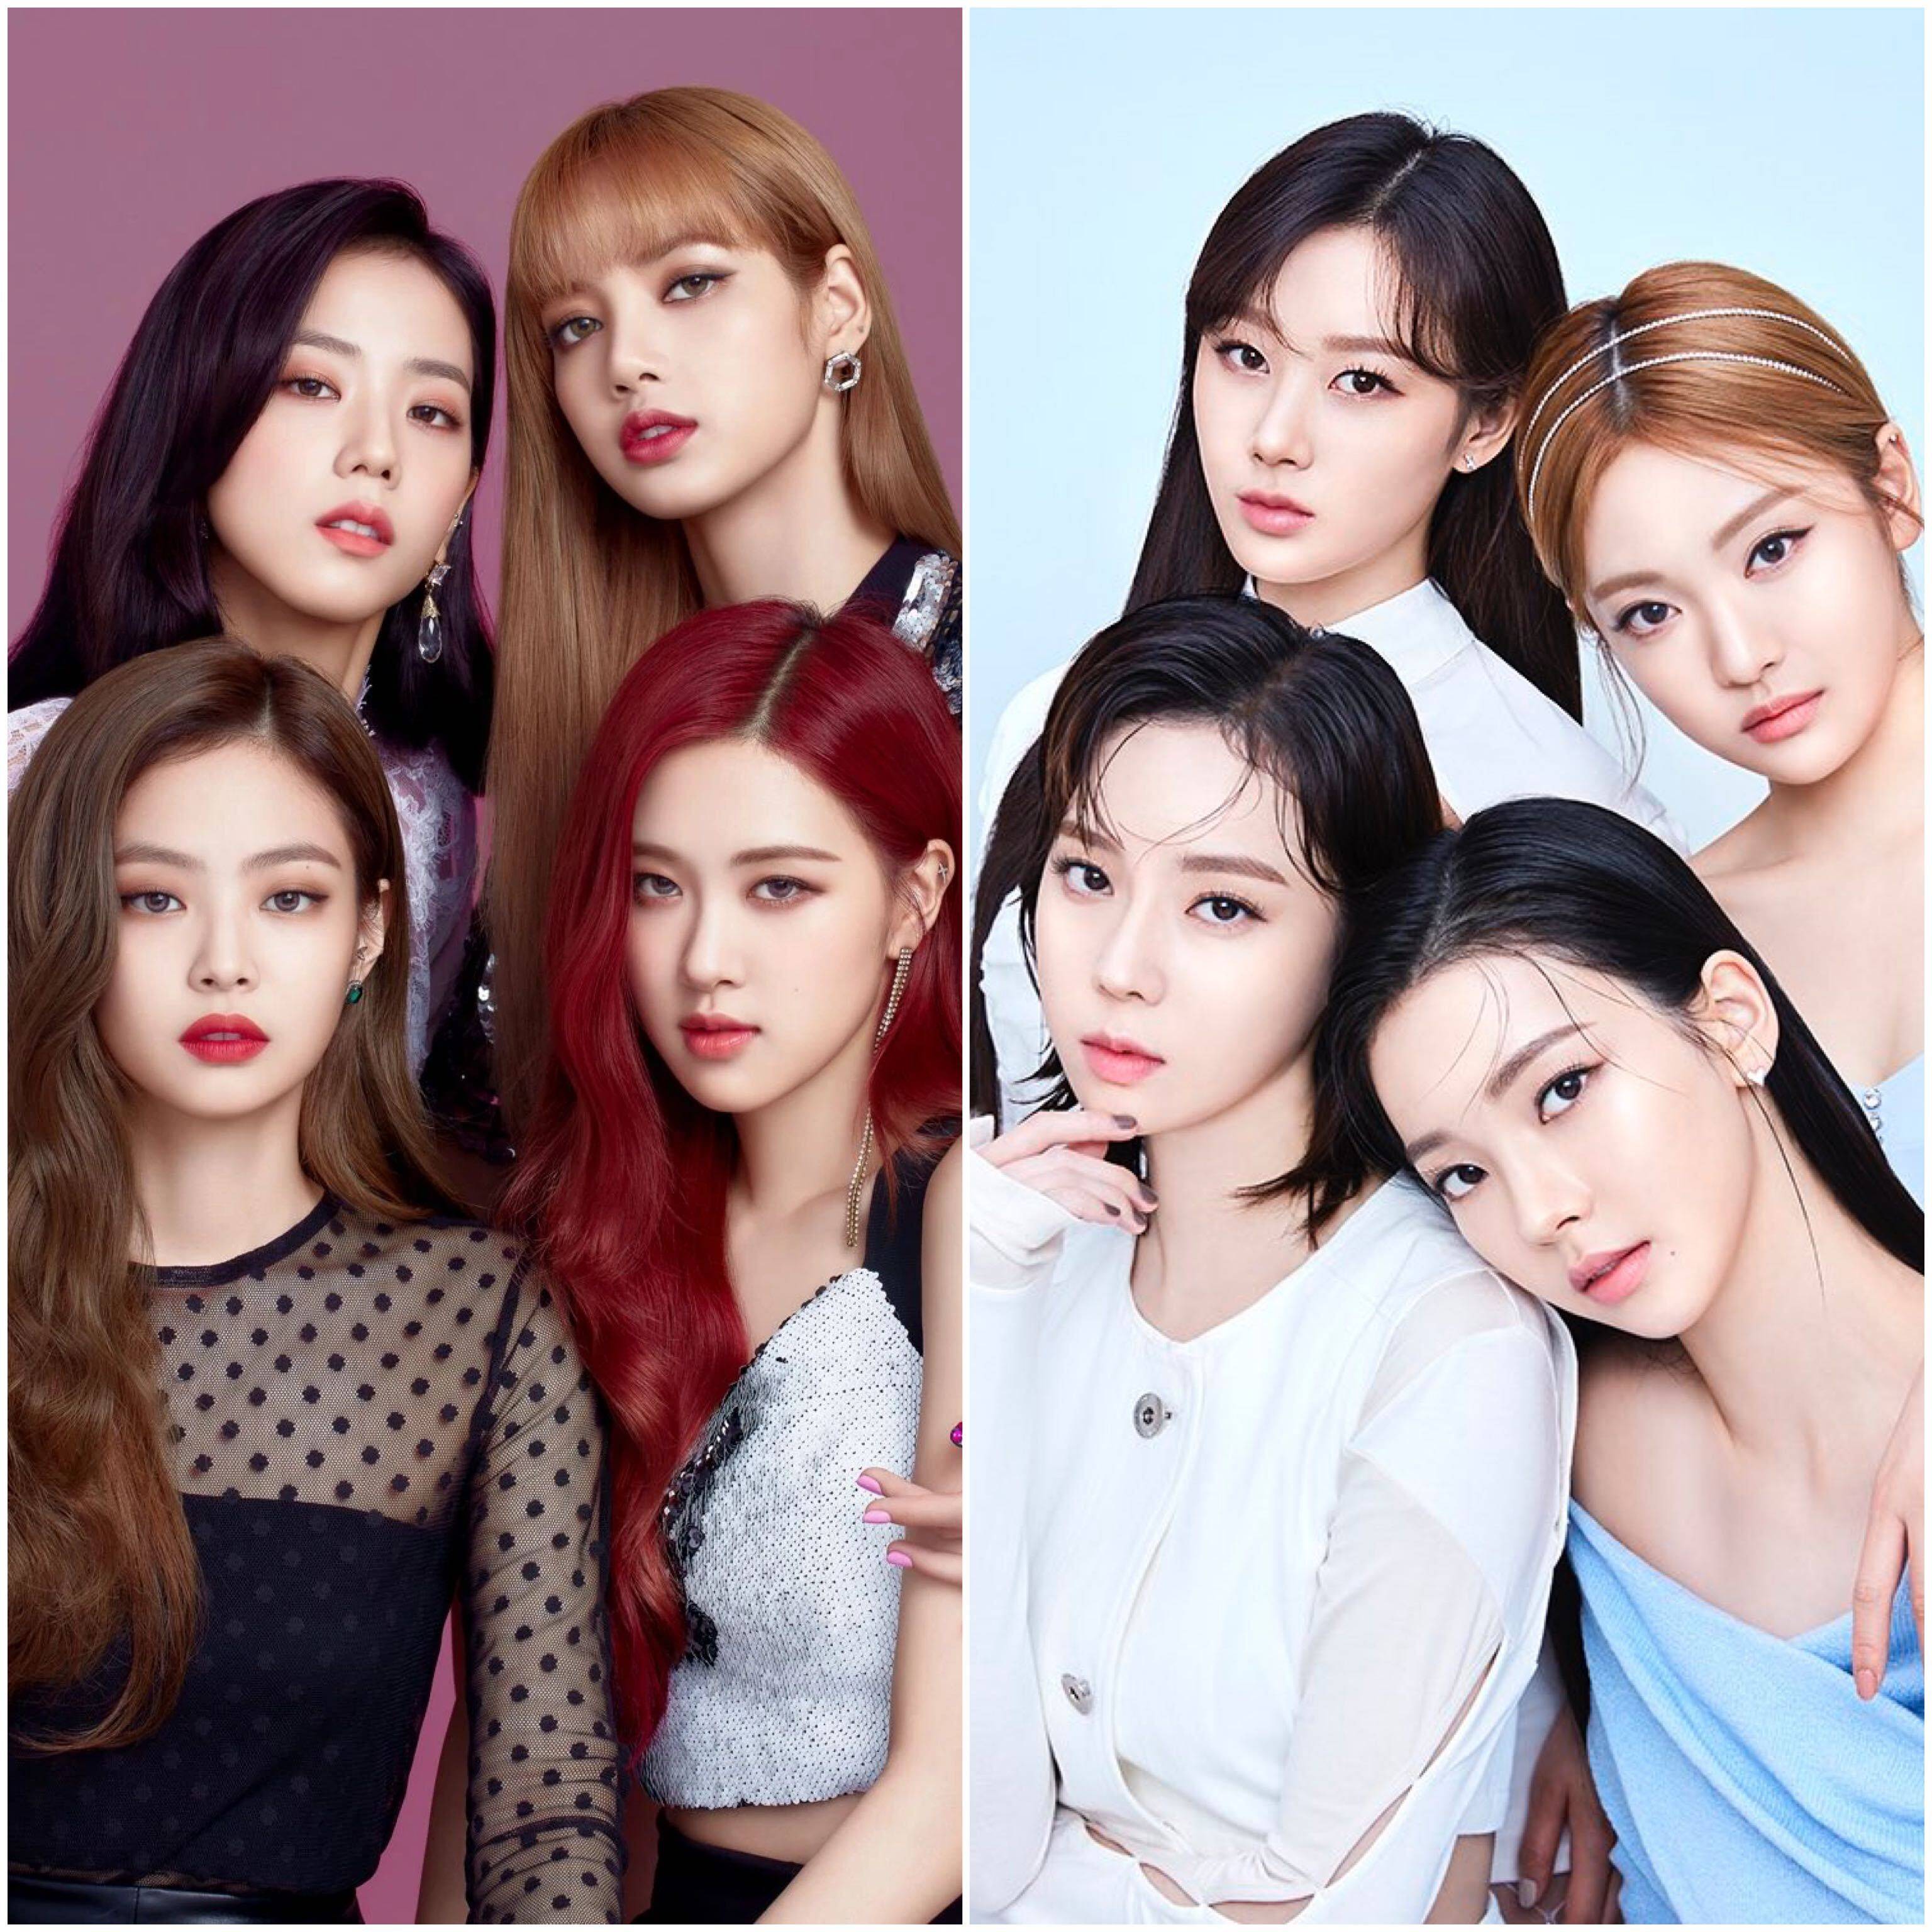 Is Aespa the new Blackpink? The K-pop supergroups, compared – from Karina,  Giselle, Winter and Ningning's Coachella performances and endorsements with  luxury brands like Givenchy, to smash hit debuts | South China